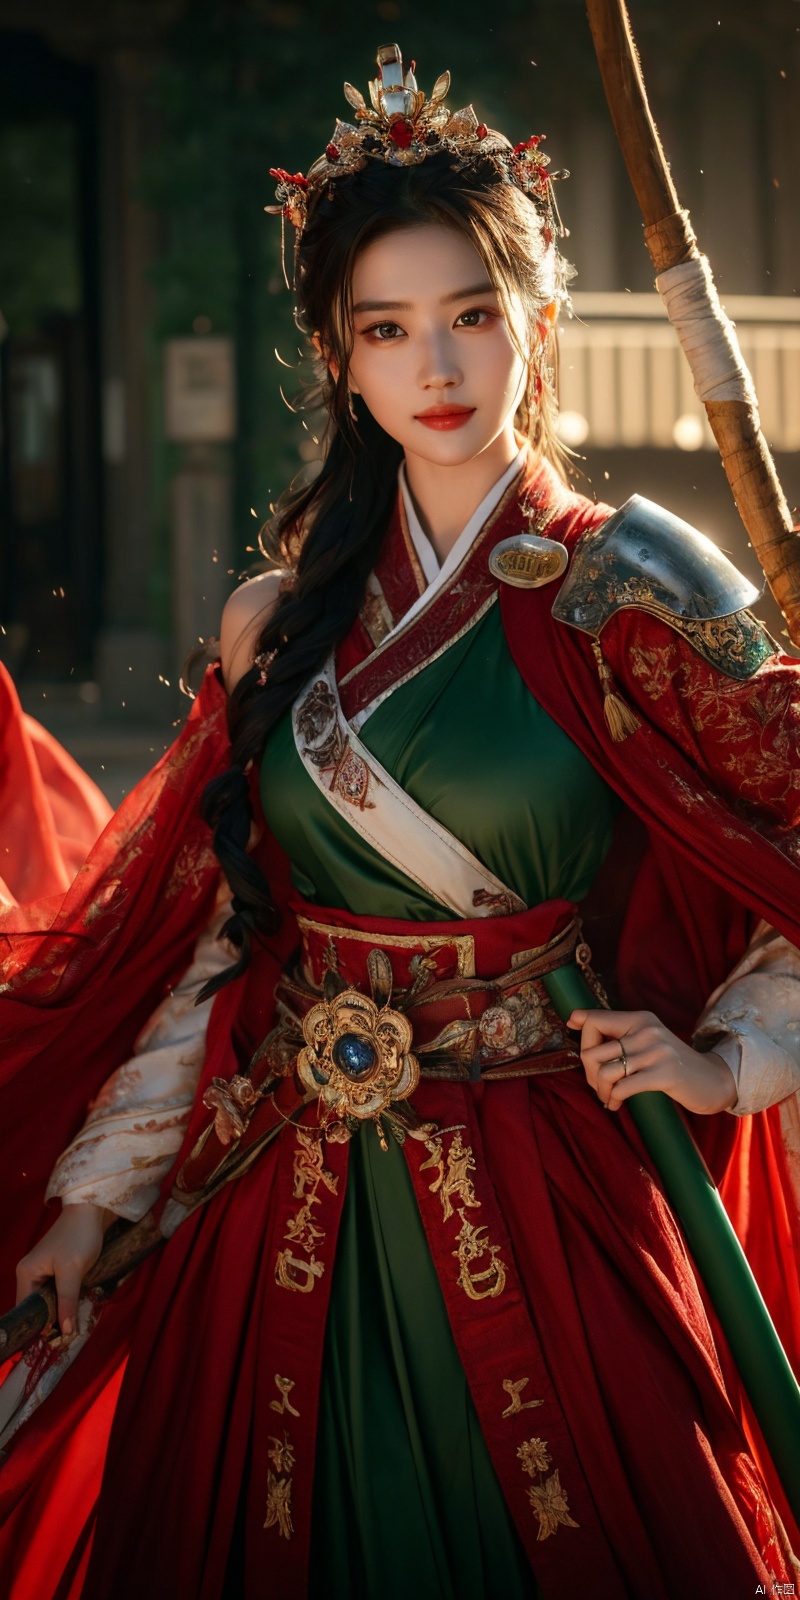 best quality, masterpiece, realistic,cowboy_shot,(Good structure), DSLR Quality,Depth of field,kind smile,looking_at_viewer,Dynamic pose, 
, 1girl,Wearing a jade crown, shining silver armor, a. Treading towards the sky with   tendon boots; Wearing a crimson cloak on her shoulders, carrying a three foot green blade on her waist, and carrying an iron tire bow on her back, coupled with her tall figure and resolute expression,Facing the camera, liuyifei,  